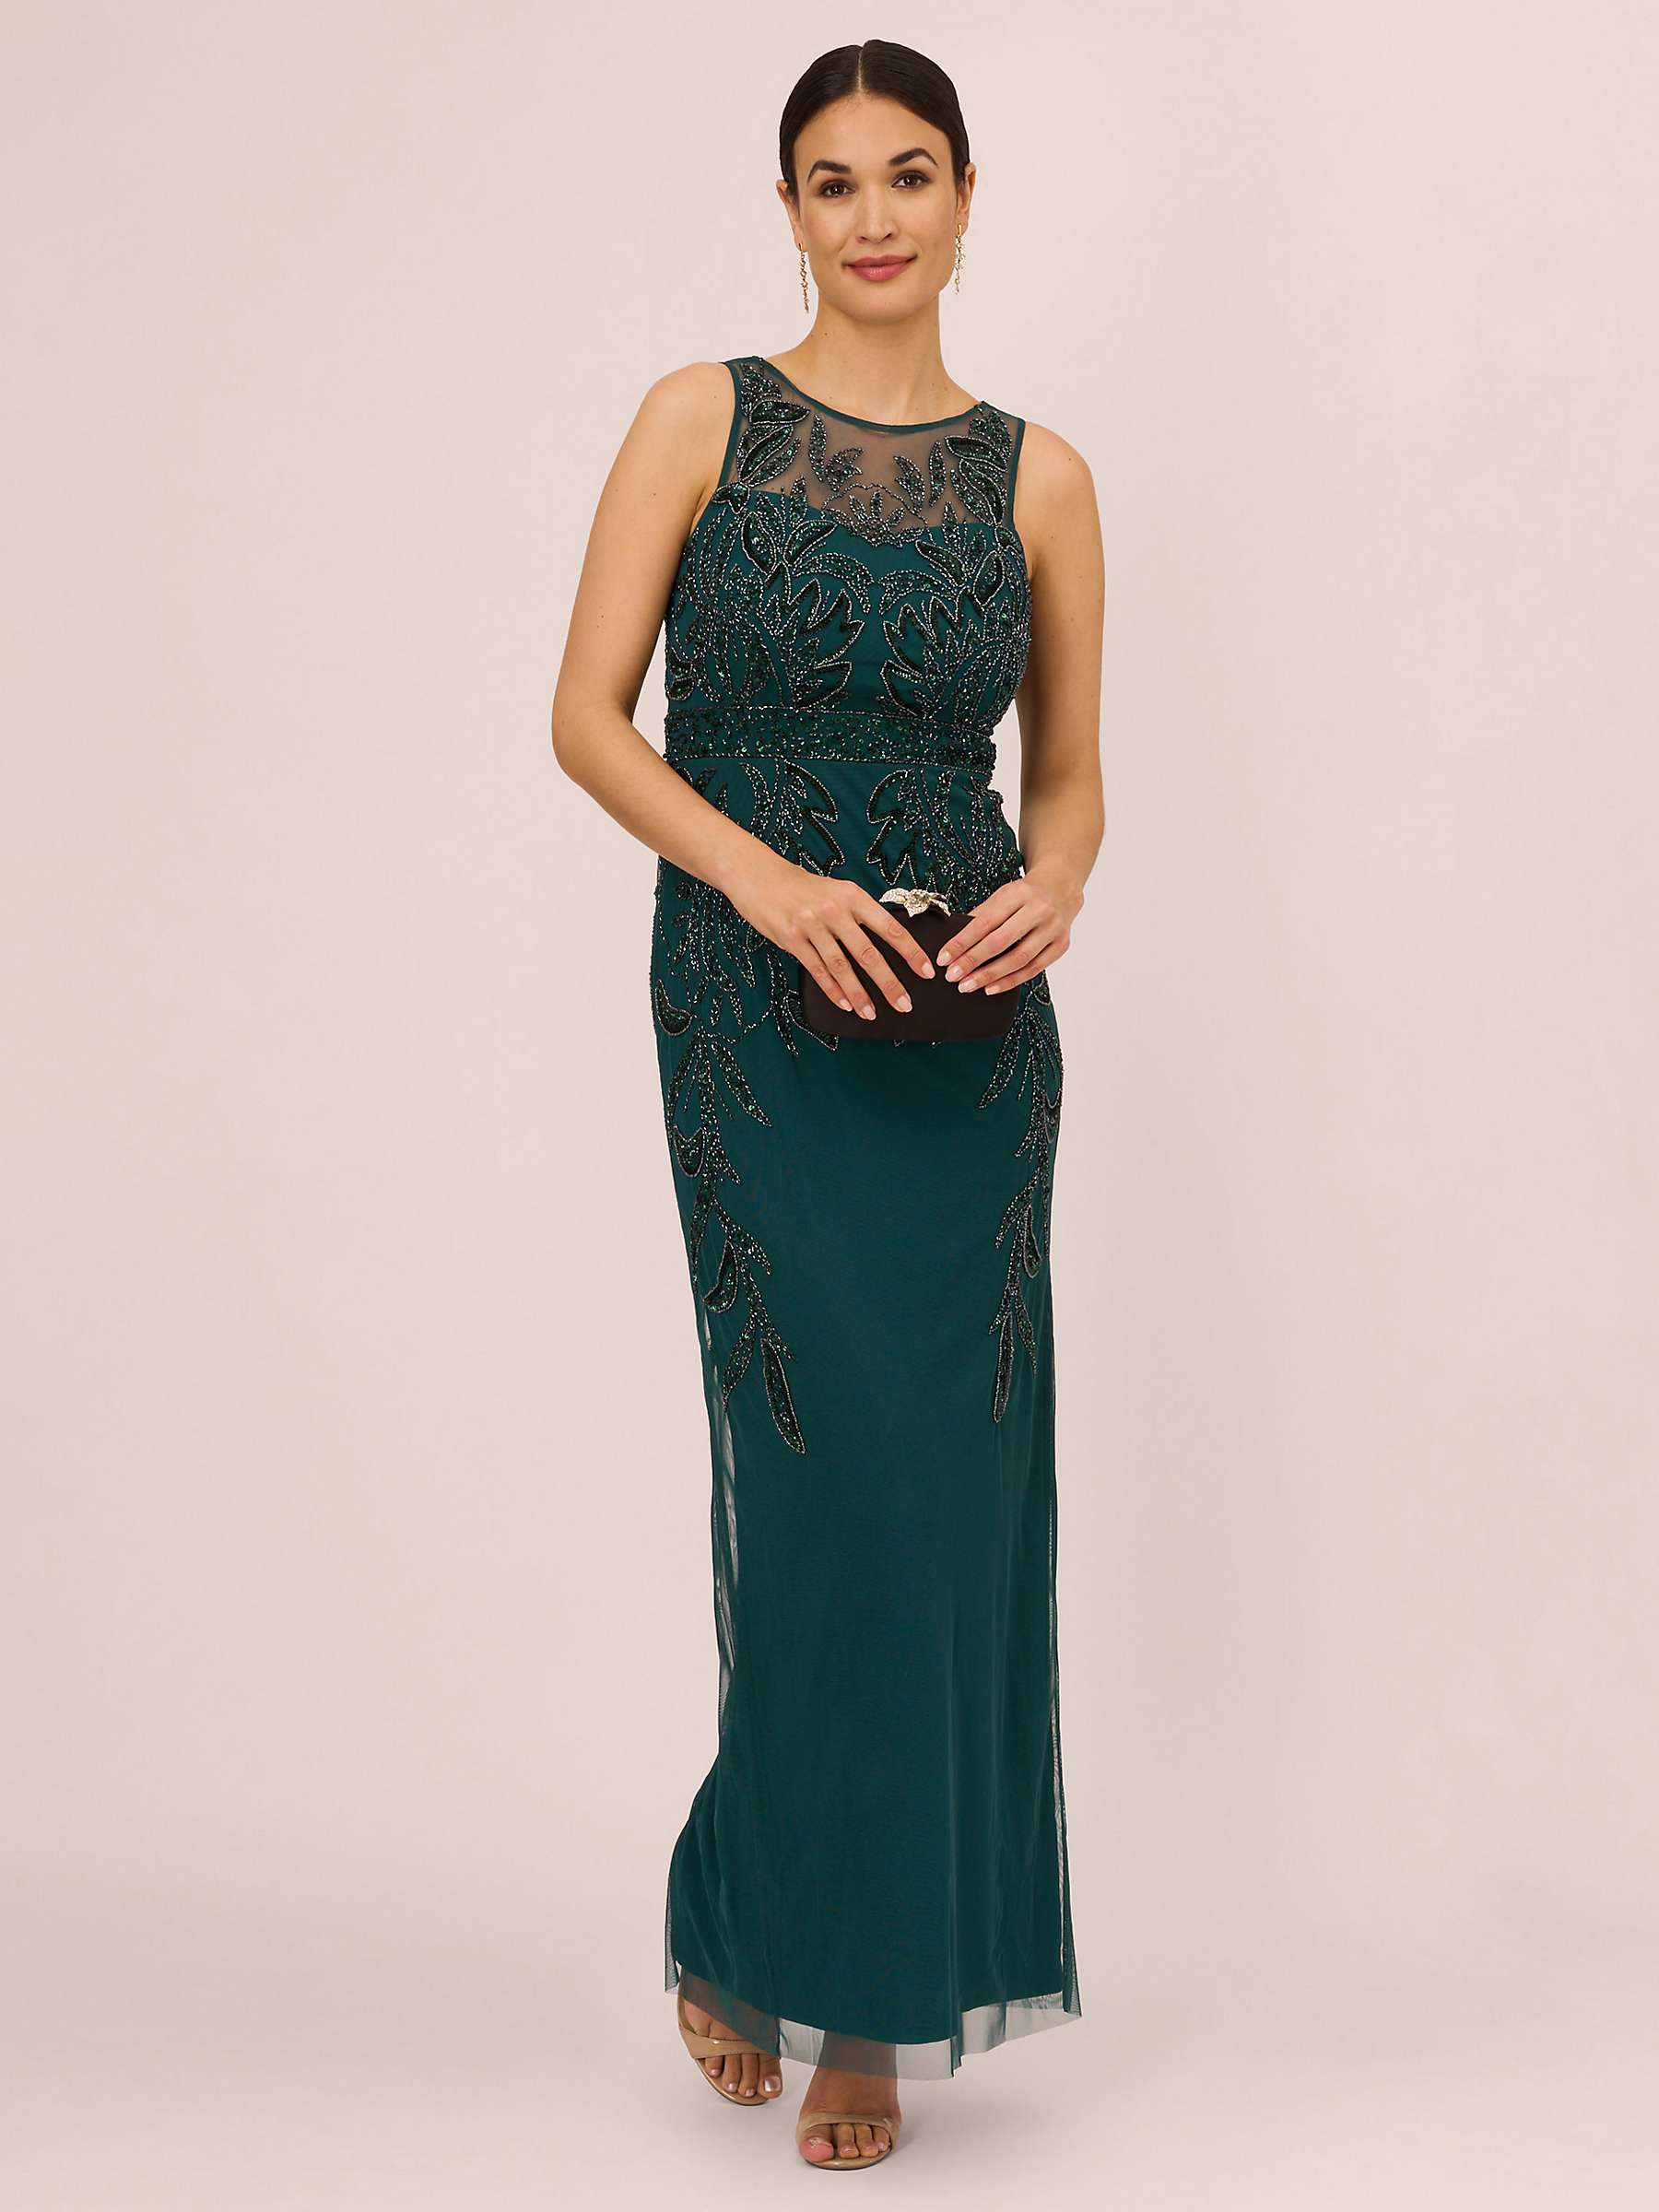 Buy Adrianna Papell Papell Studio Beaded Column Dress Online at johnlewis.com